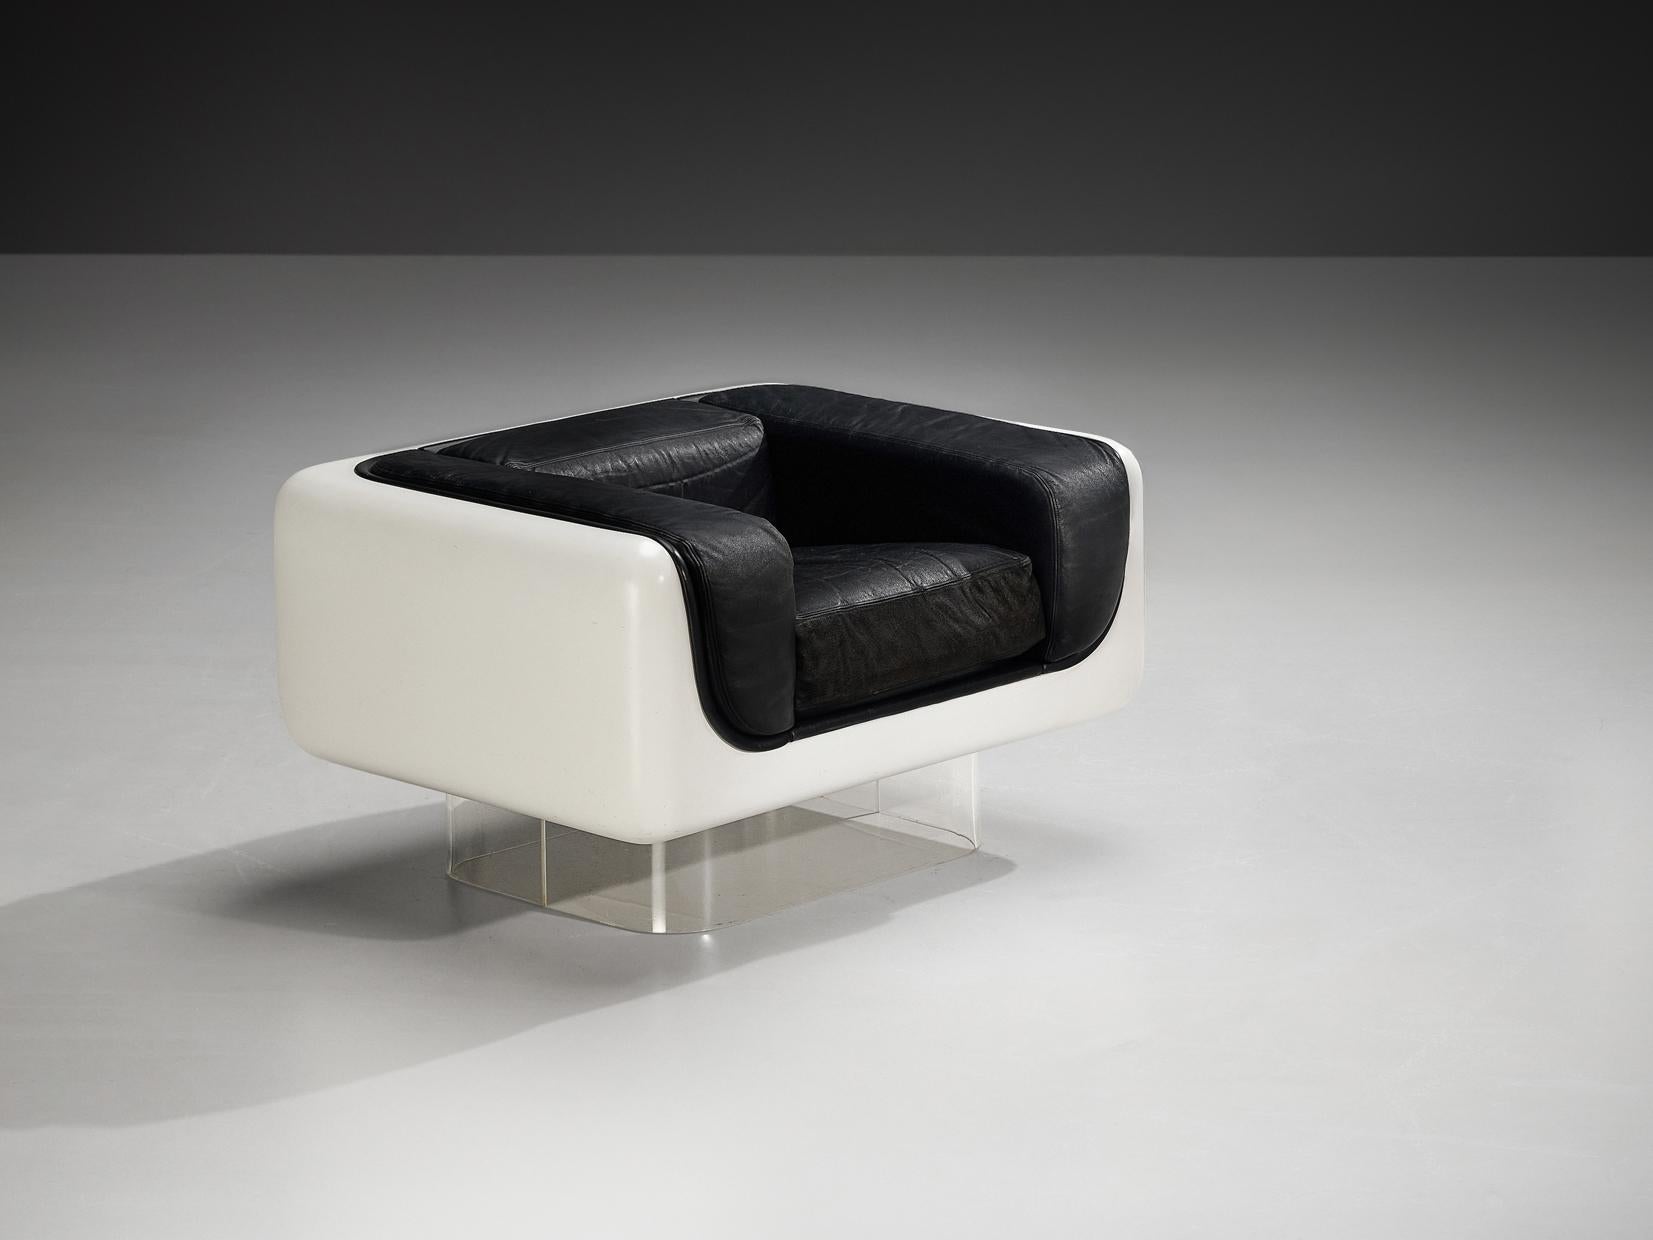 William C. Andrus for Steelcase, lounge chair, lacquered fiberglass, plexiglass, leather, United States, 1970s

Lovely space age easy chair designed by William C. Andrus for Steelcase in the 1970s. This design truly resembles the ethos of the